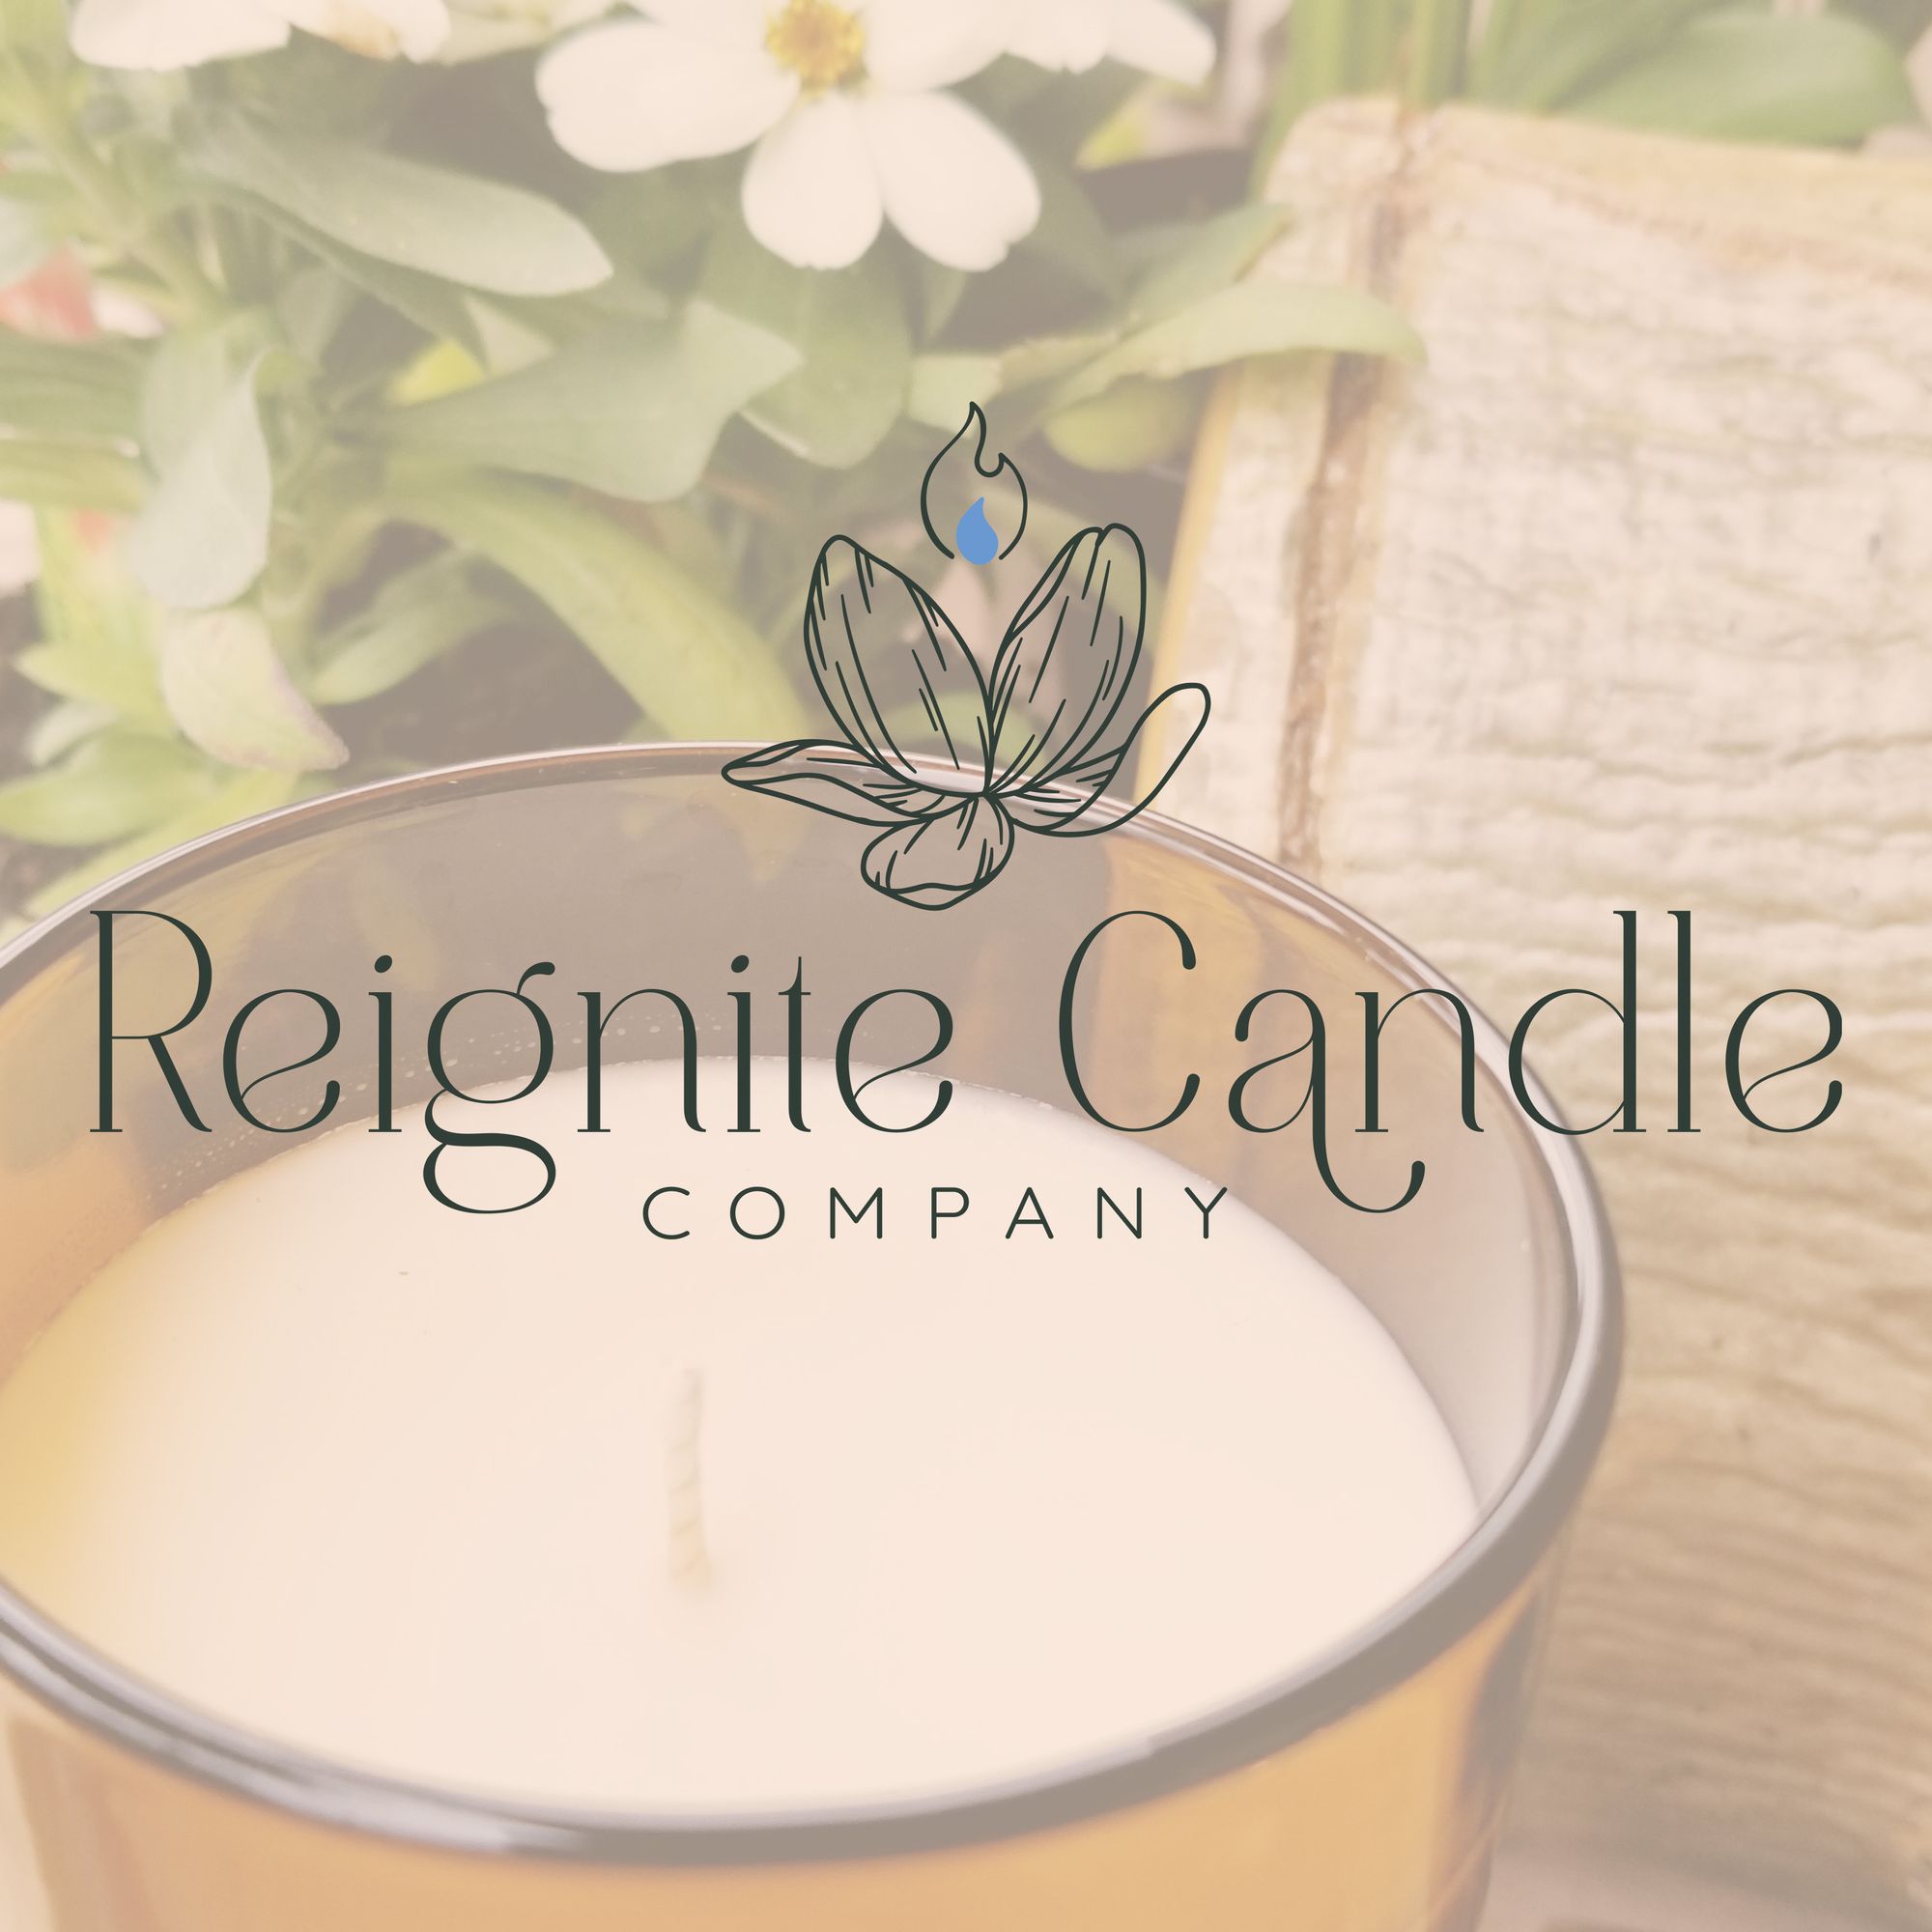 Ignite Your Inner Light - Reignite Candle Company